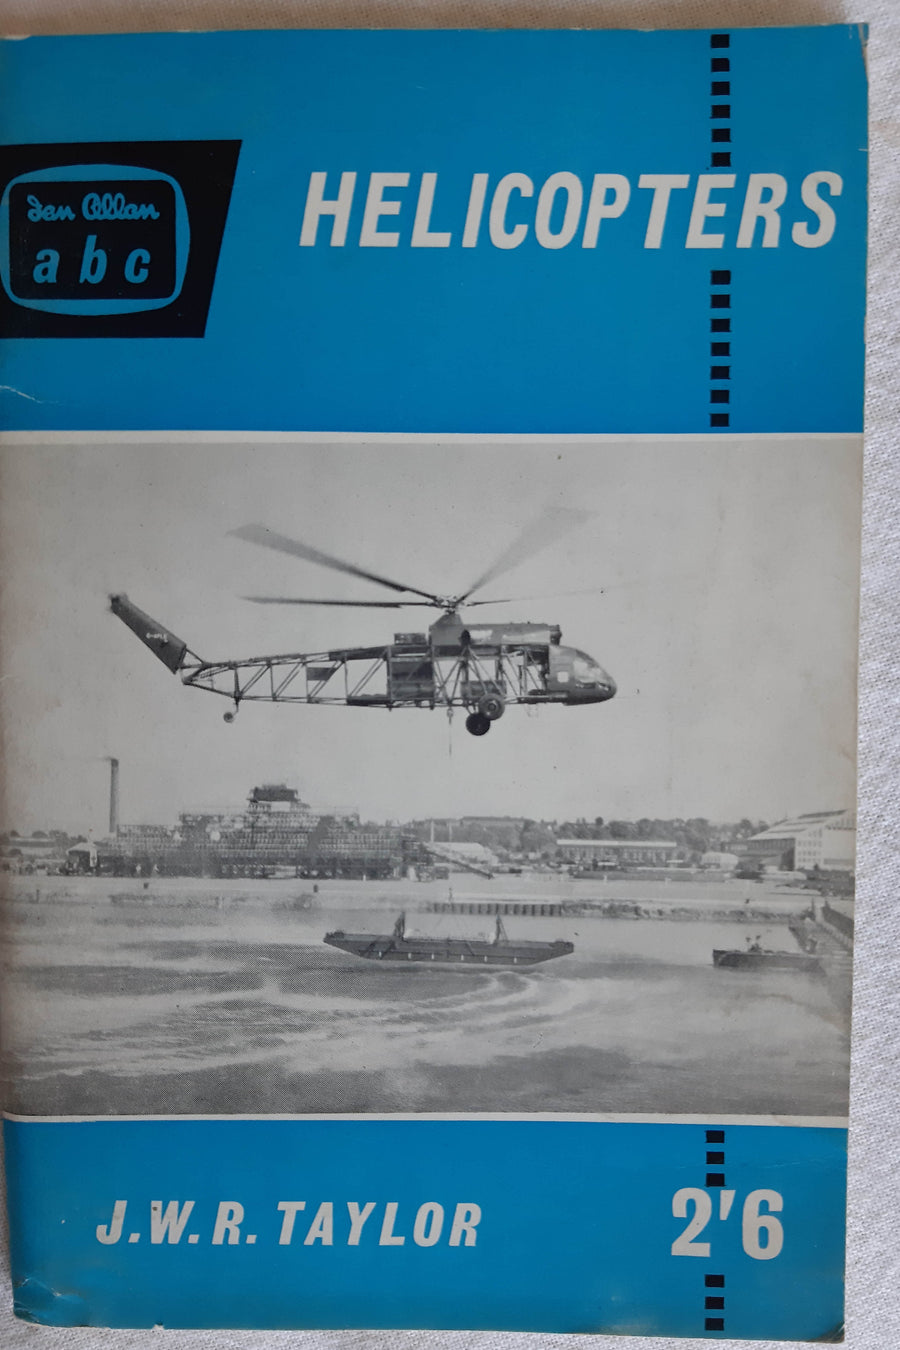 ABC HELICOPTERS 2'6